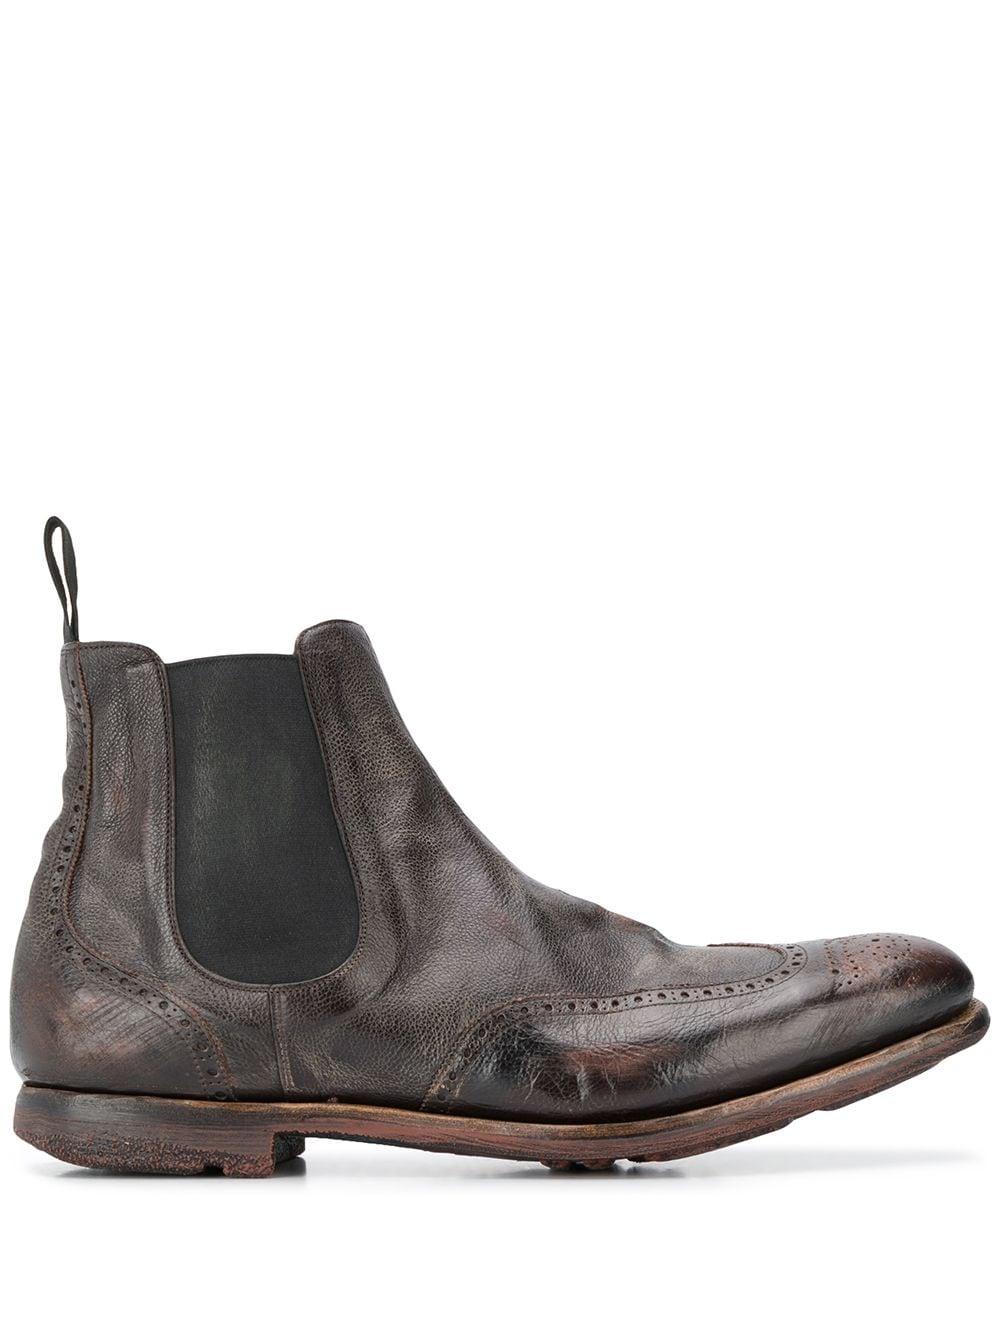 Distressed Effect Boots in Brown for Men | Lyst